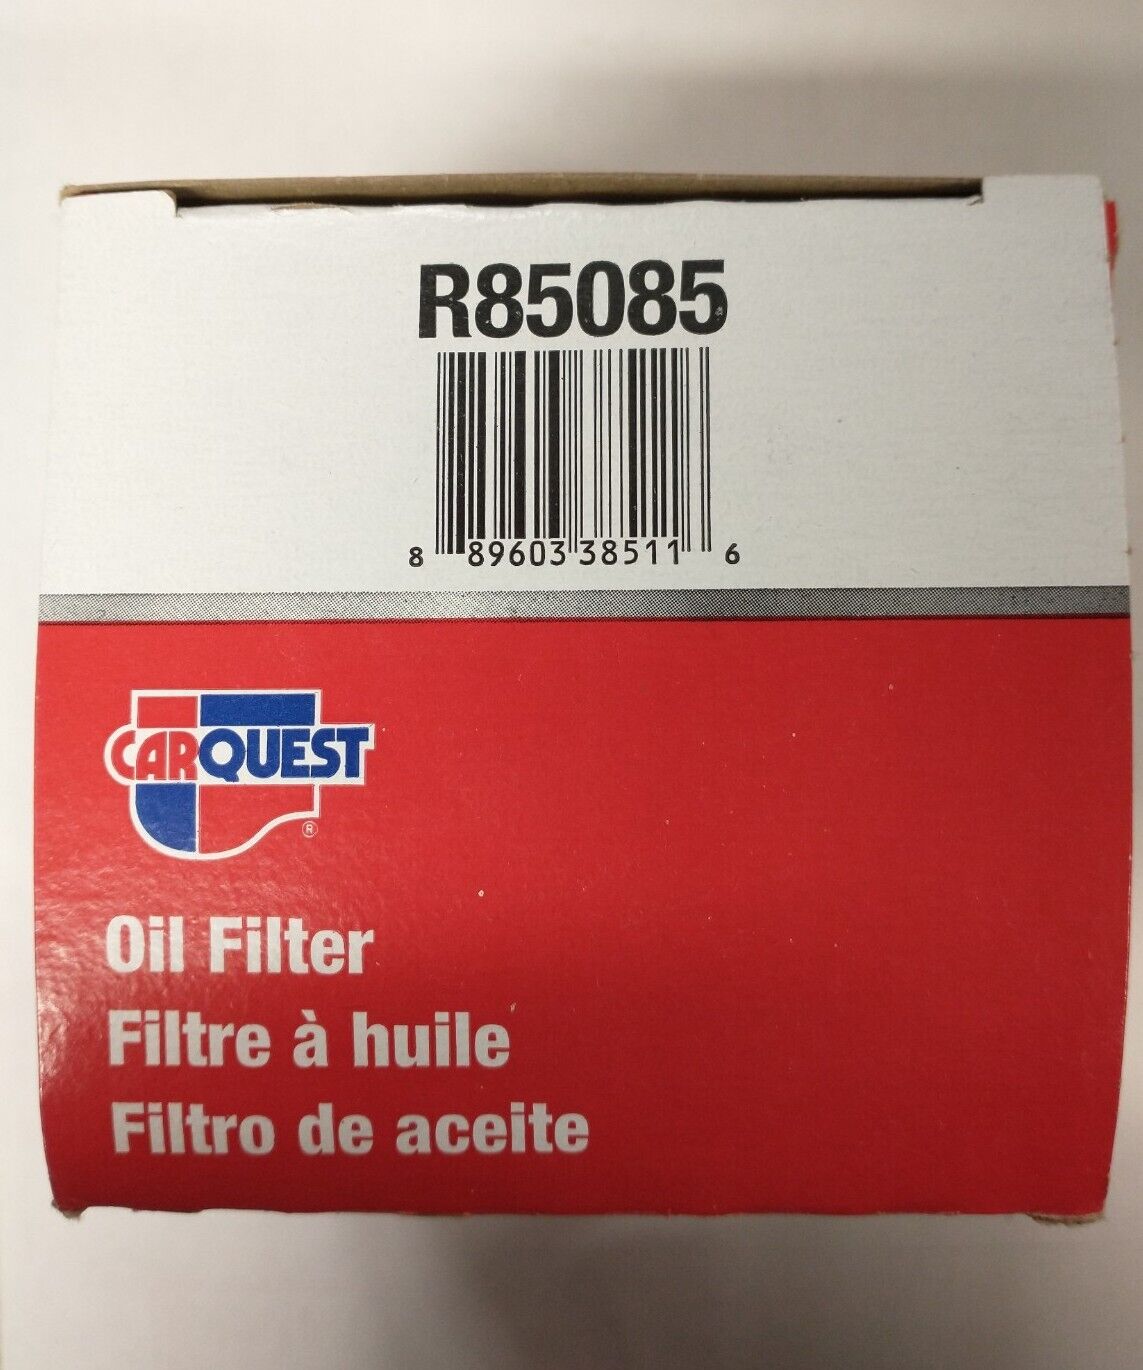 Engine Oil Filter CARQUEST R85085